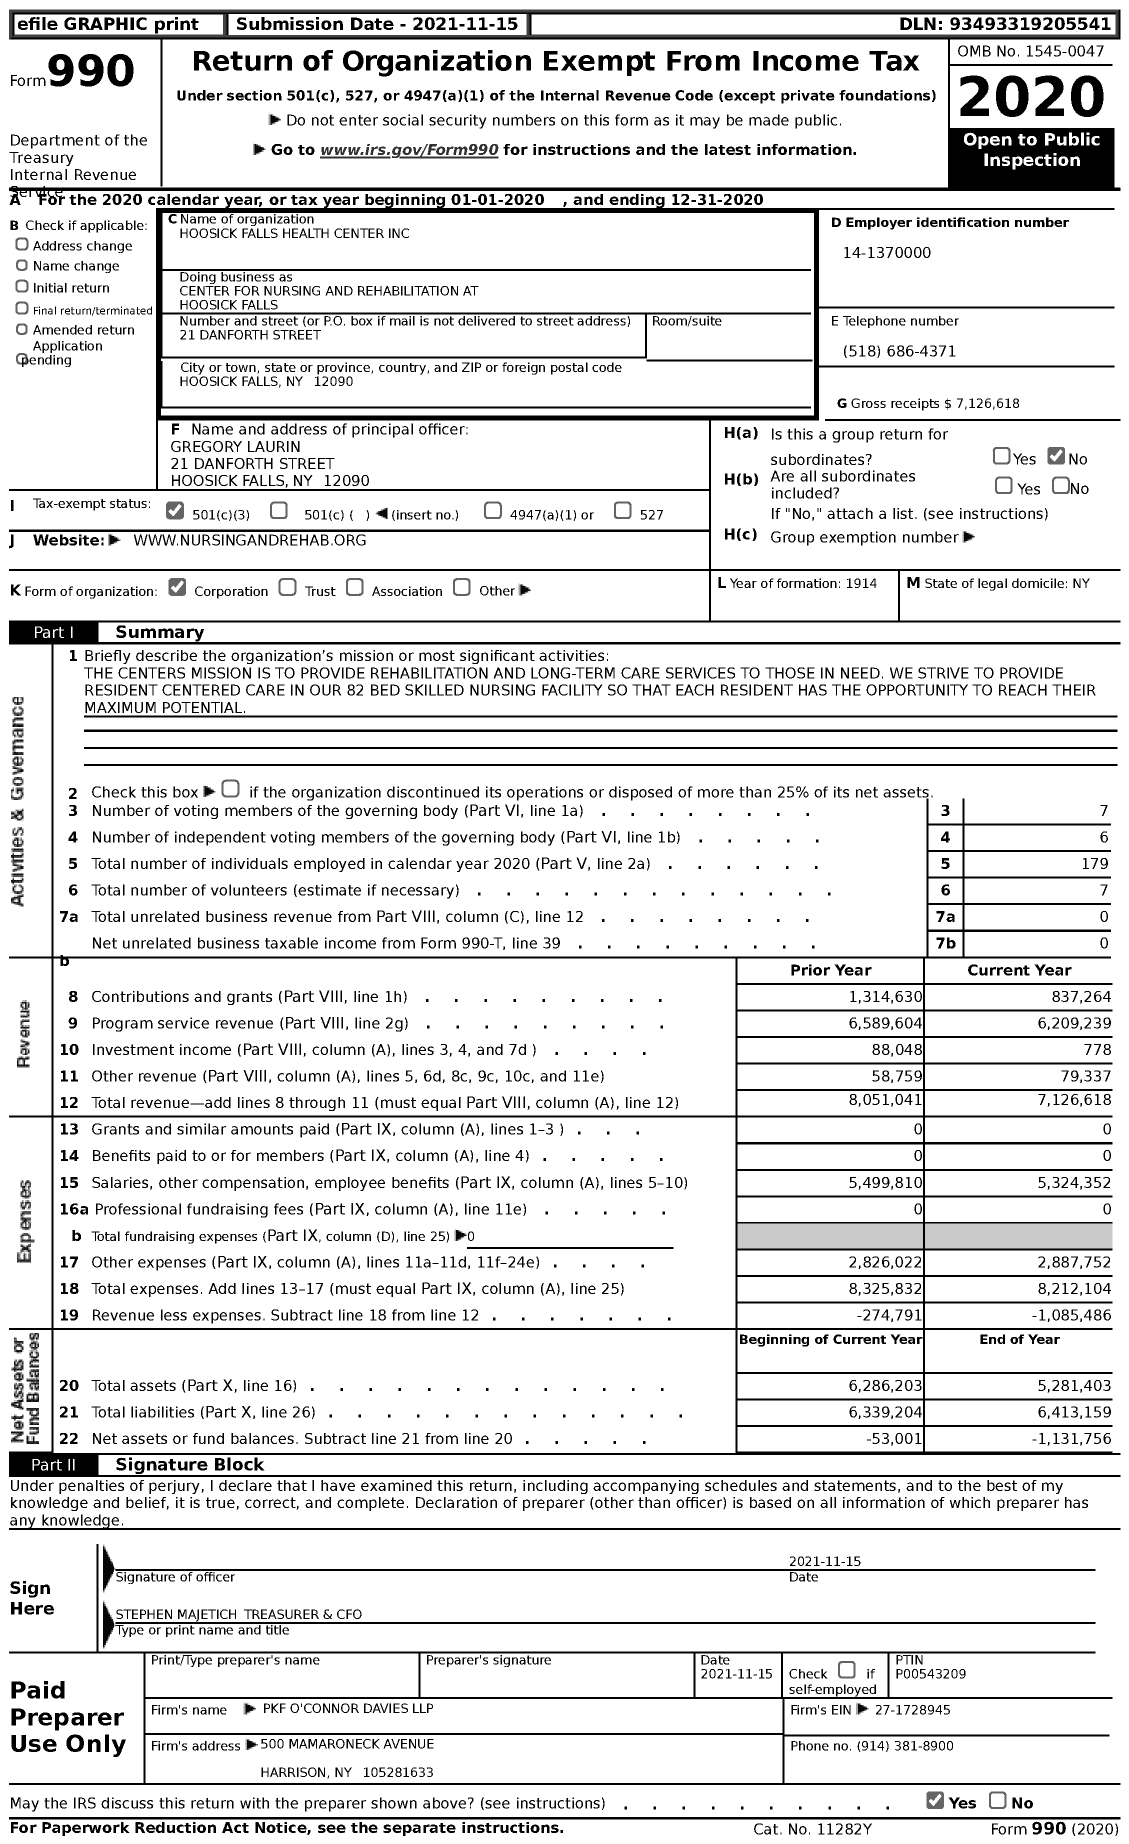 Image of first page of 2020 Form 990 for Center for Nursing and Rehabilitation at Hoosick Falls